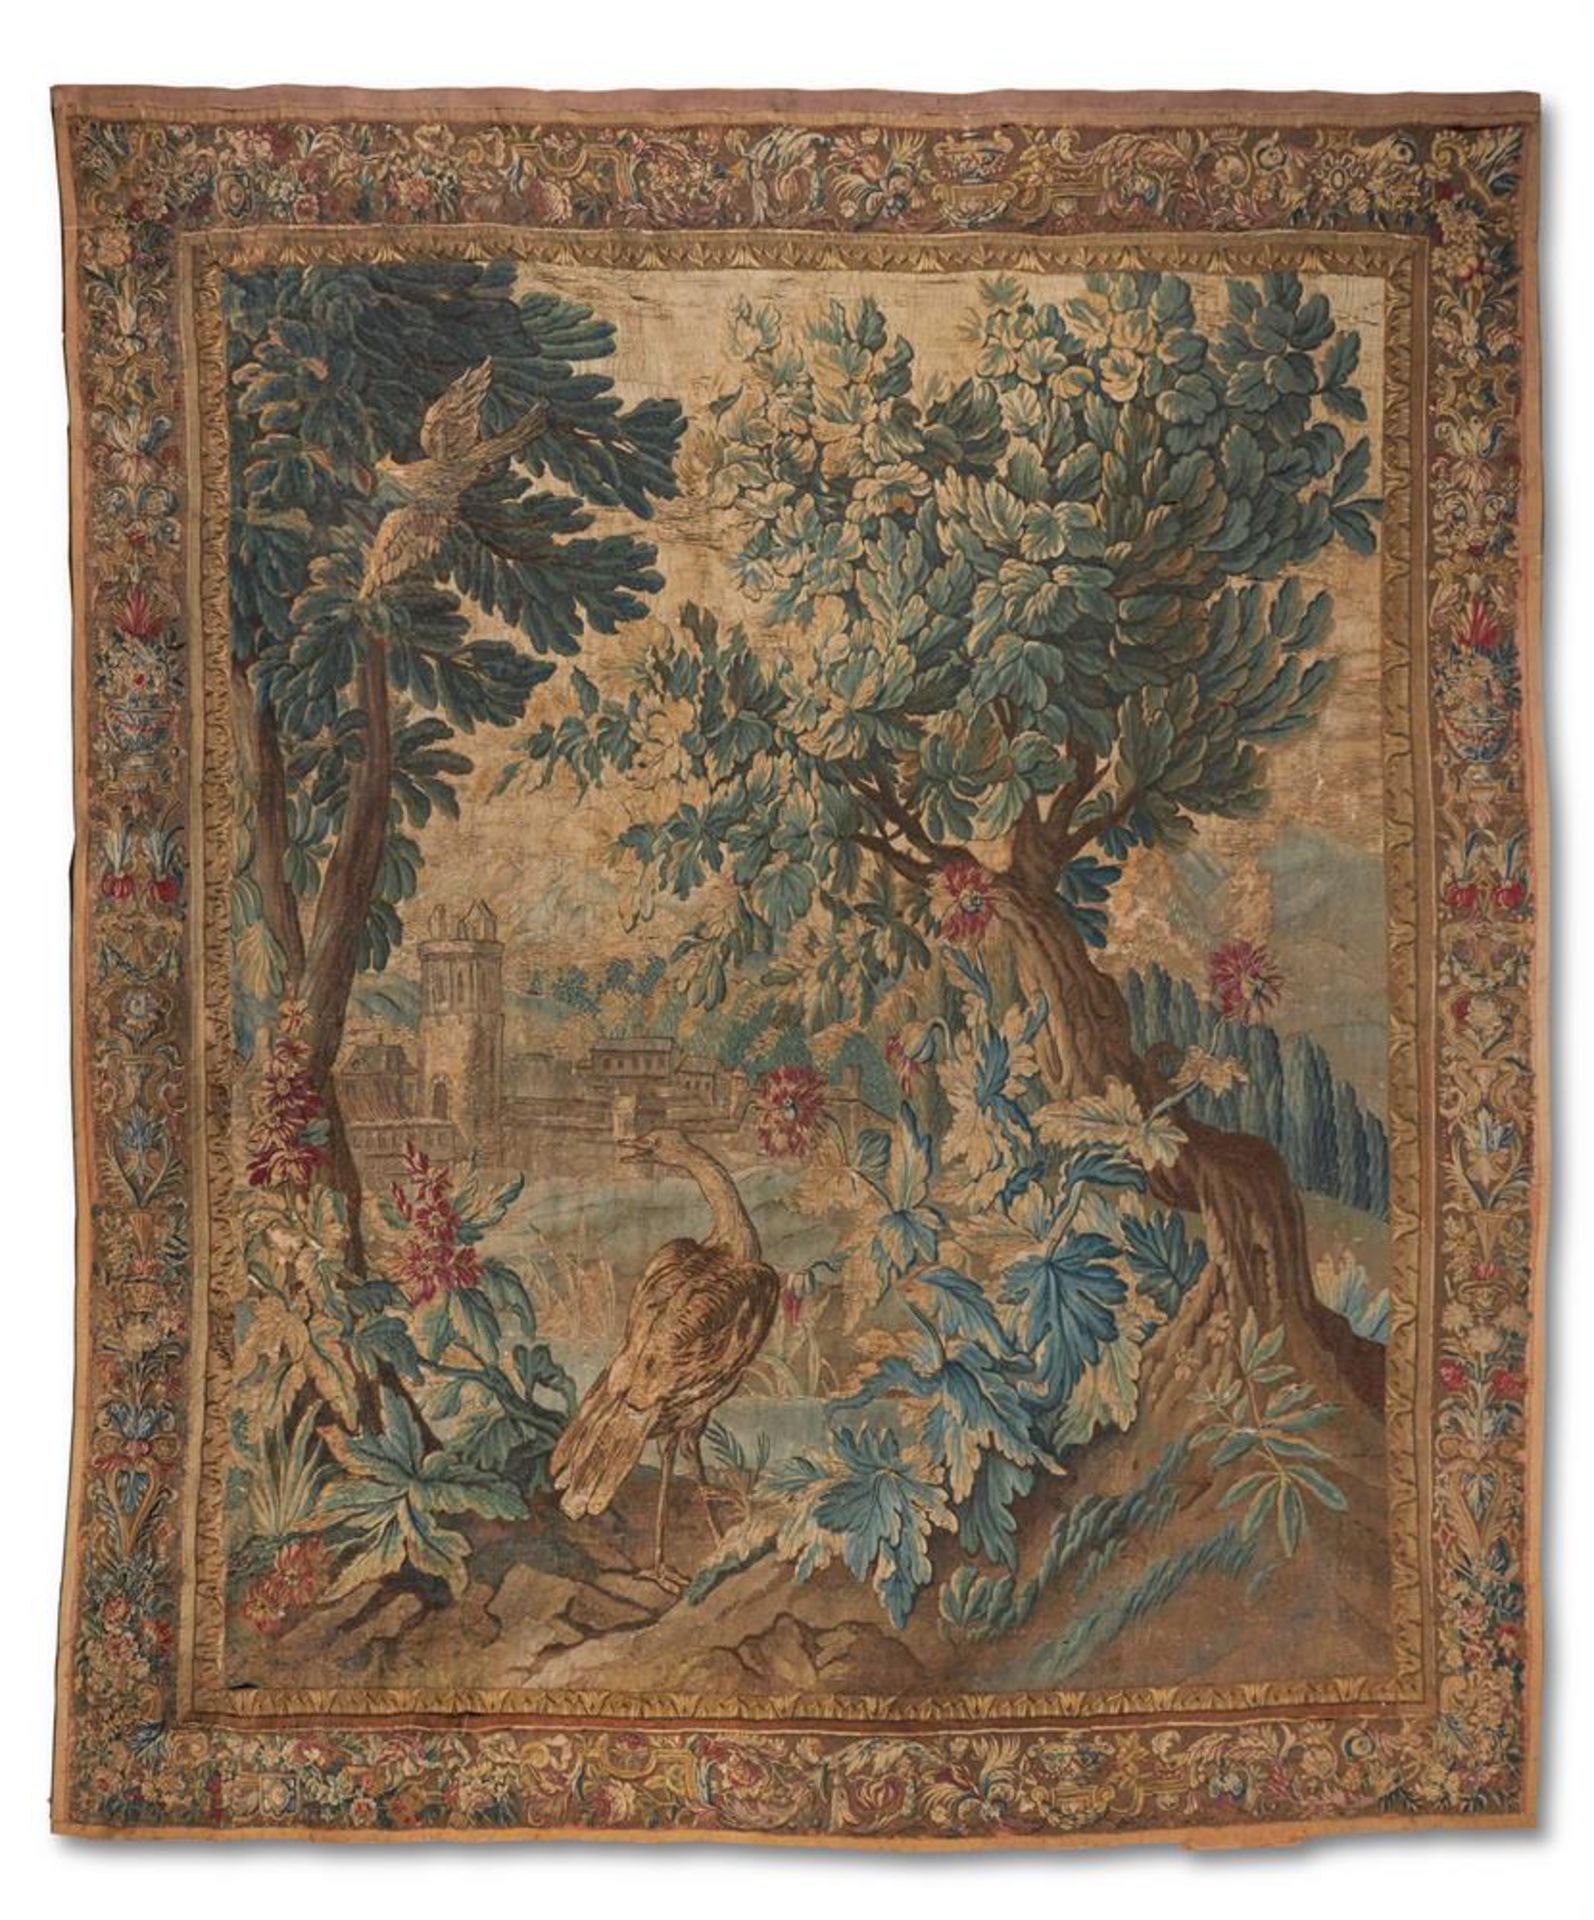 A FRENCH VERDURE TAPESTRY, EARLY 18TH CENTURY